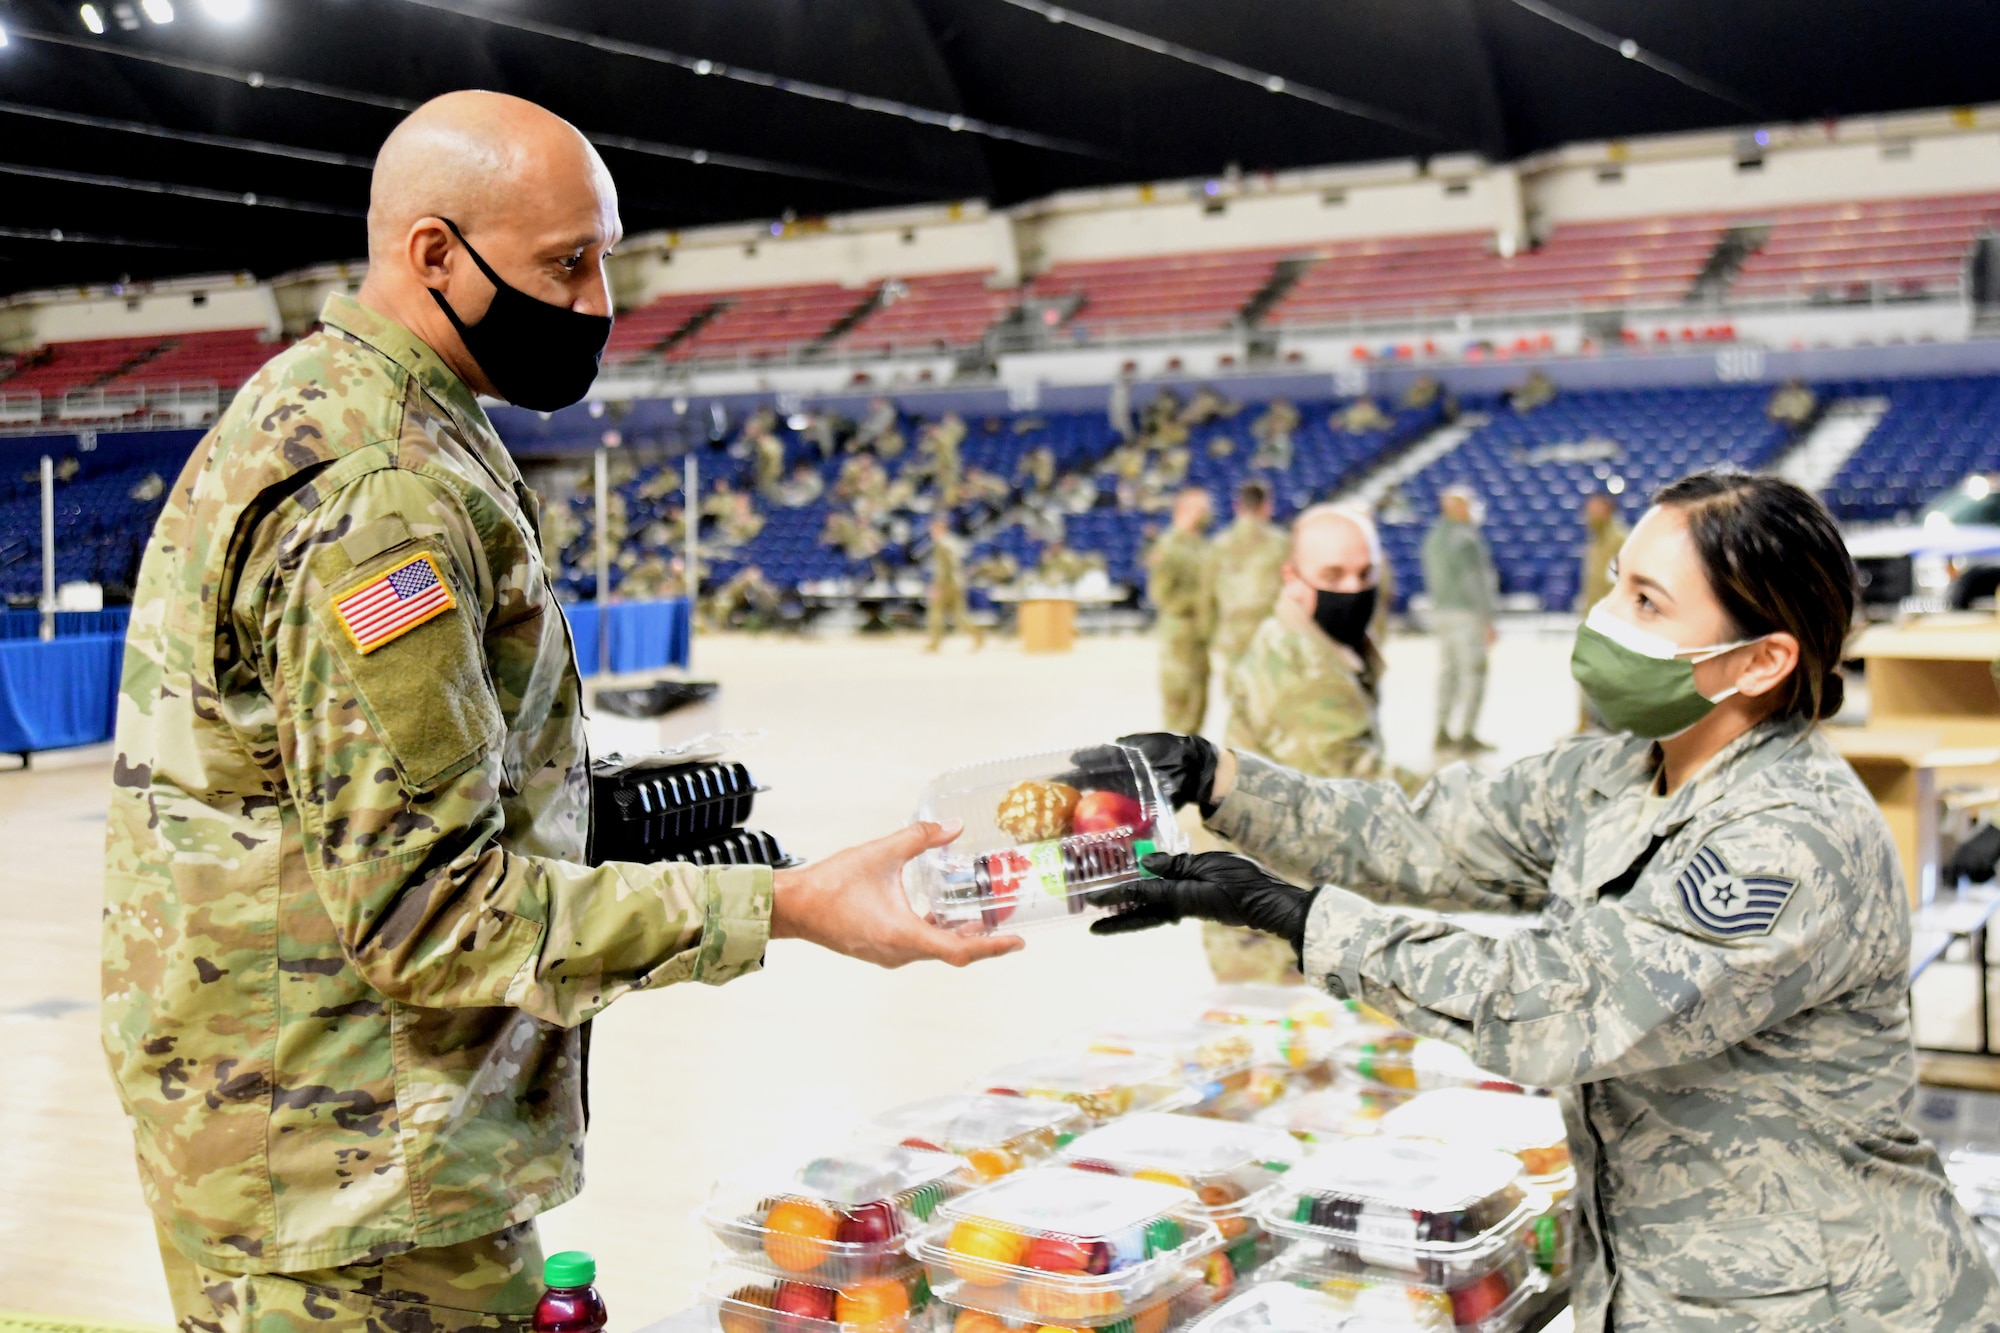 Tech. Sgt. Jennifer Zamudio, a member of the District of Columbia Air National Guard, distributes a meal to a Soldier at the D.C. National Guard Armory, Washington, D.C., Jan. 10, 2021. National Guard officials are stressing that the Soldiers and Airmen from all 50 states, three territories and Washington are receiving adequate food and lodging as they continue to support federal and local authorities leading up to the 59th presidential inauguration.